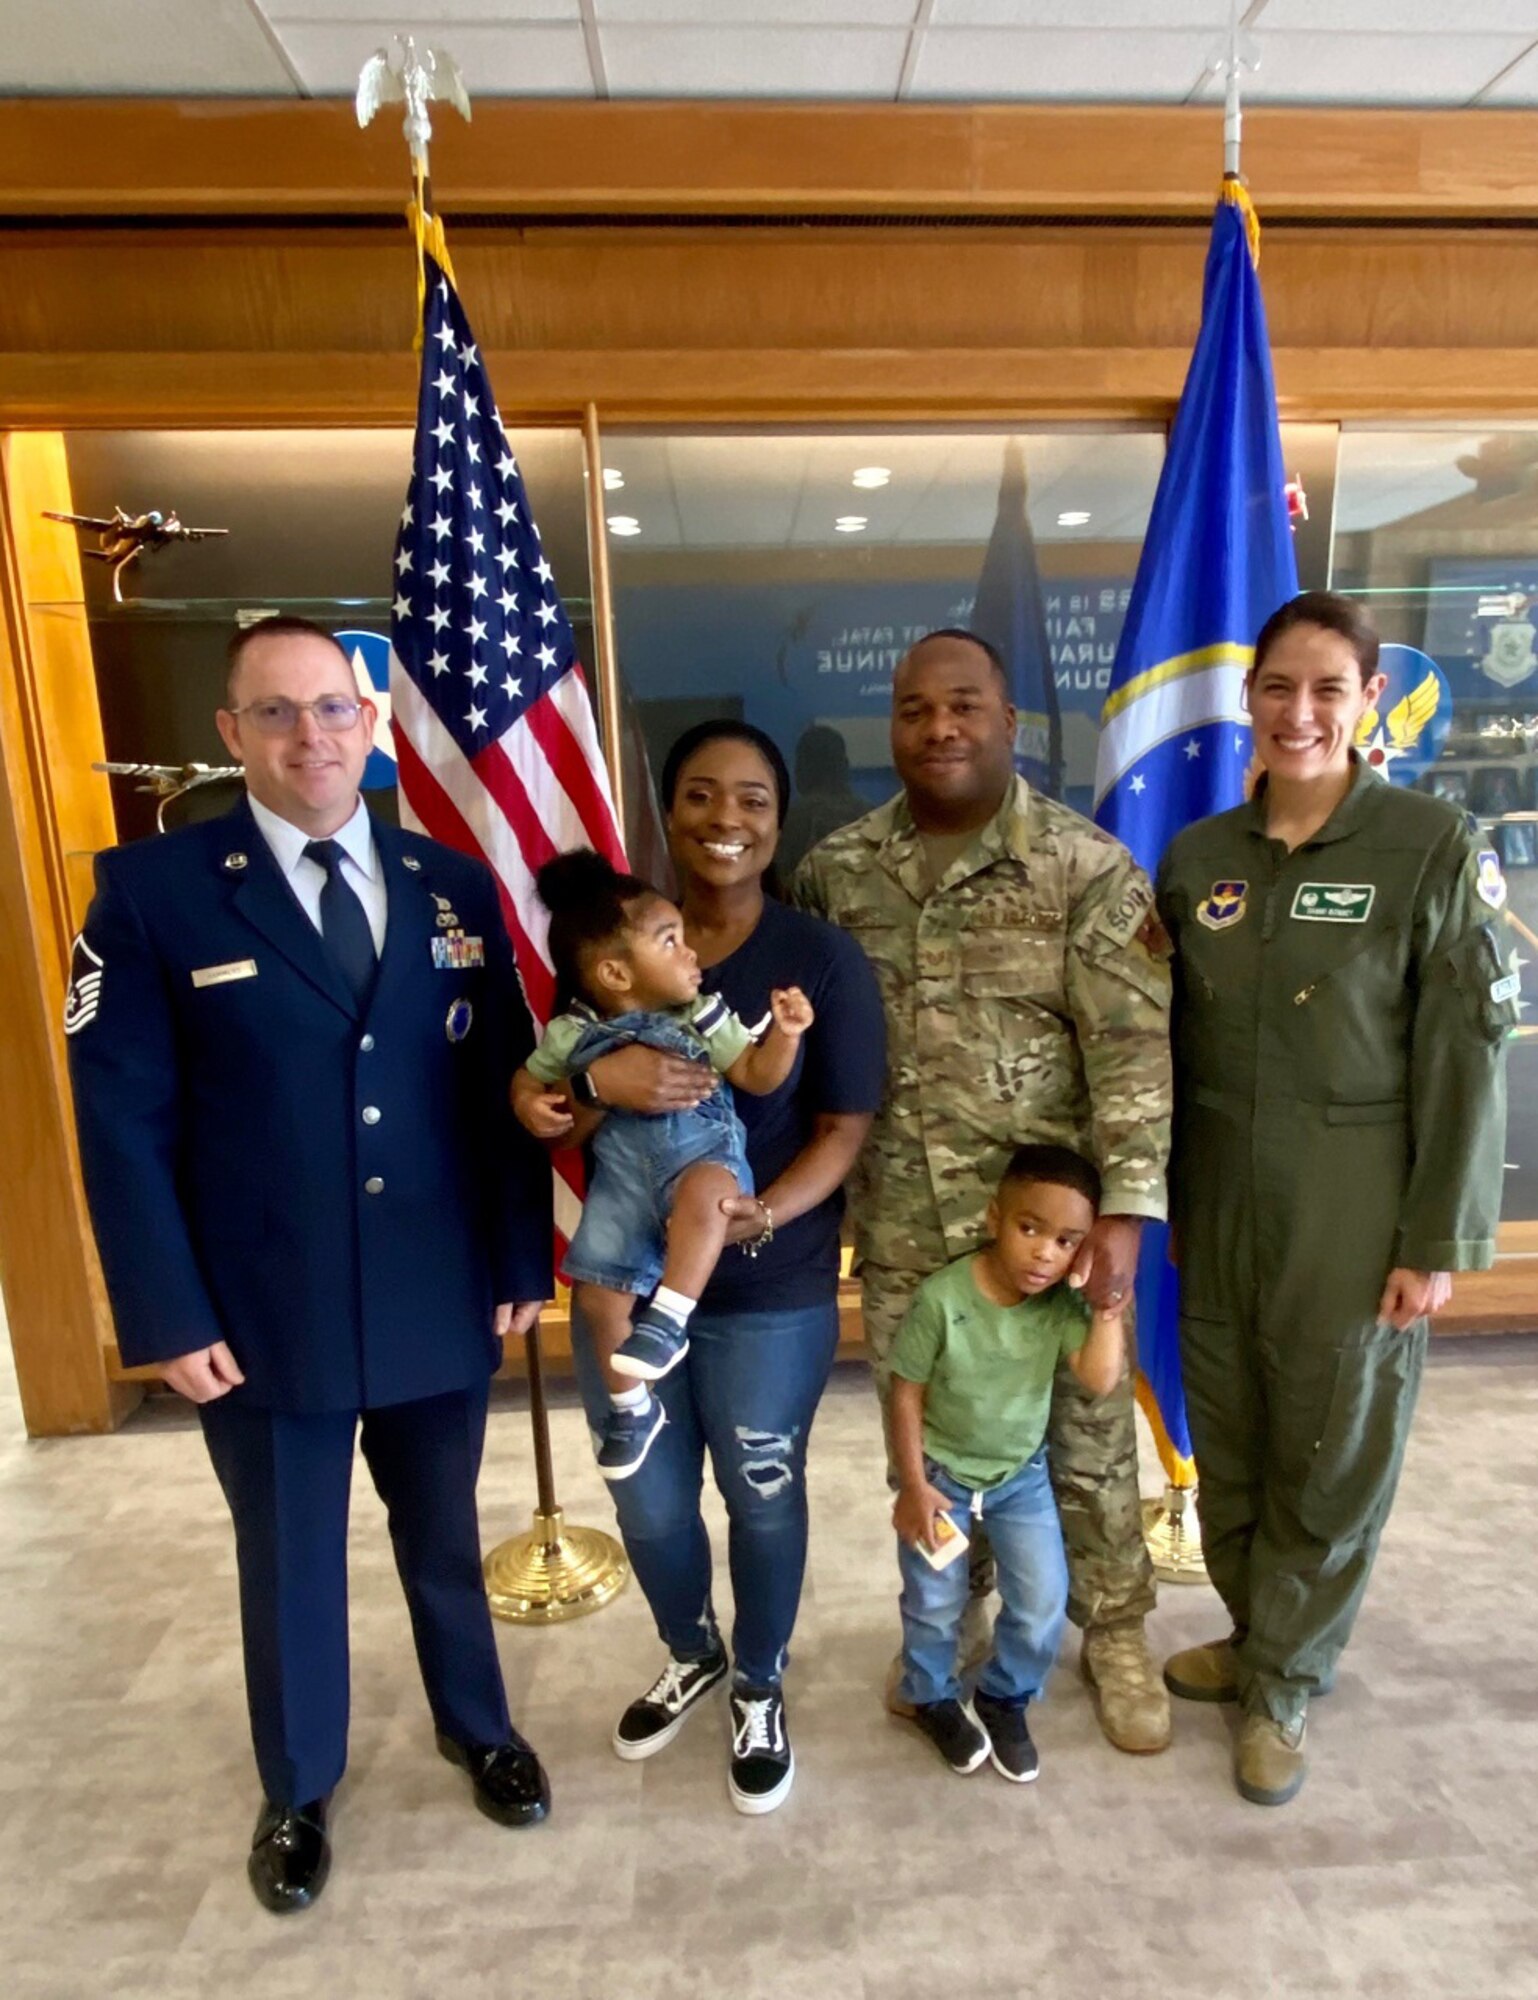 Master Sgt. Michael Hammers, an Air Force Reserve recruiter with the 352nd Recruiting Squadron, Fort Worth, Texas, used his Total Force ties to help sign Staff Sgt. Ashley Edwards to the Reserve.